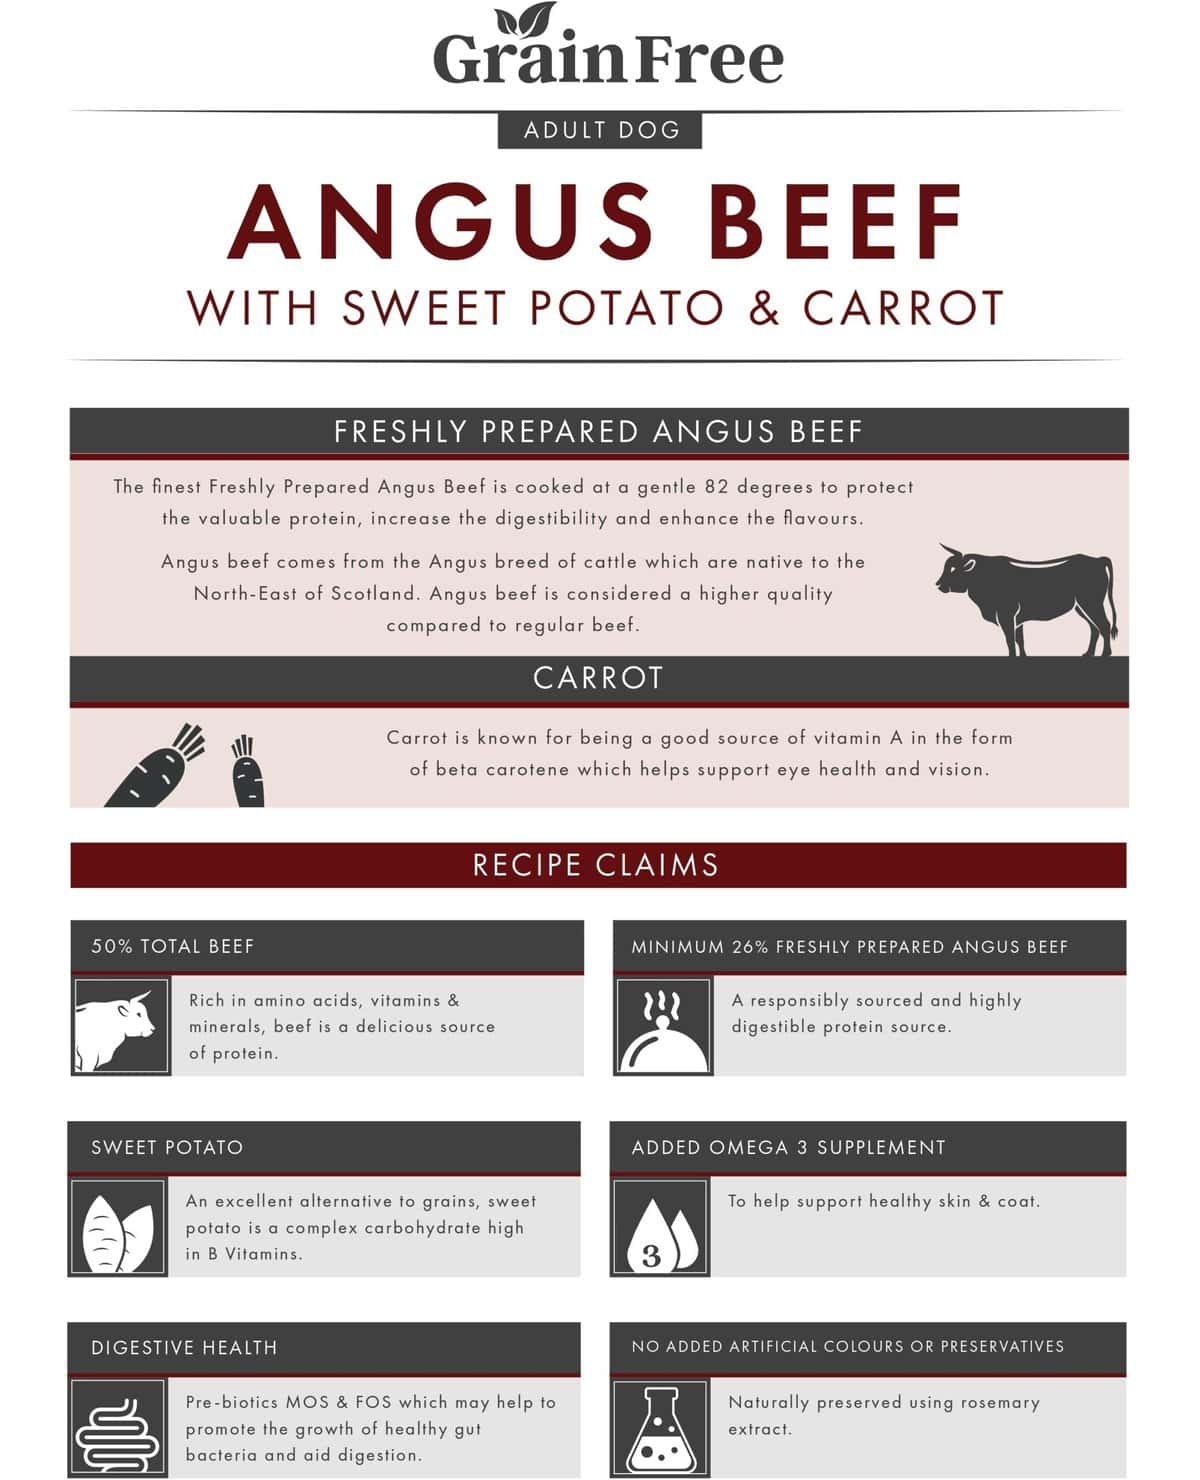 Grain Free Adult Dog 50% Angus Beef with Sweet Potato & Carrot Complete Dry Food